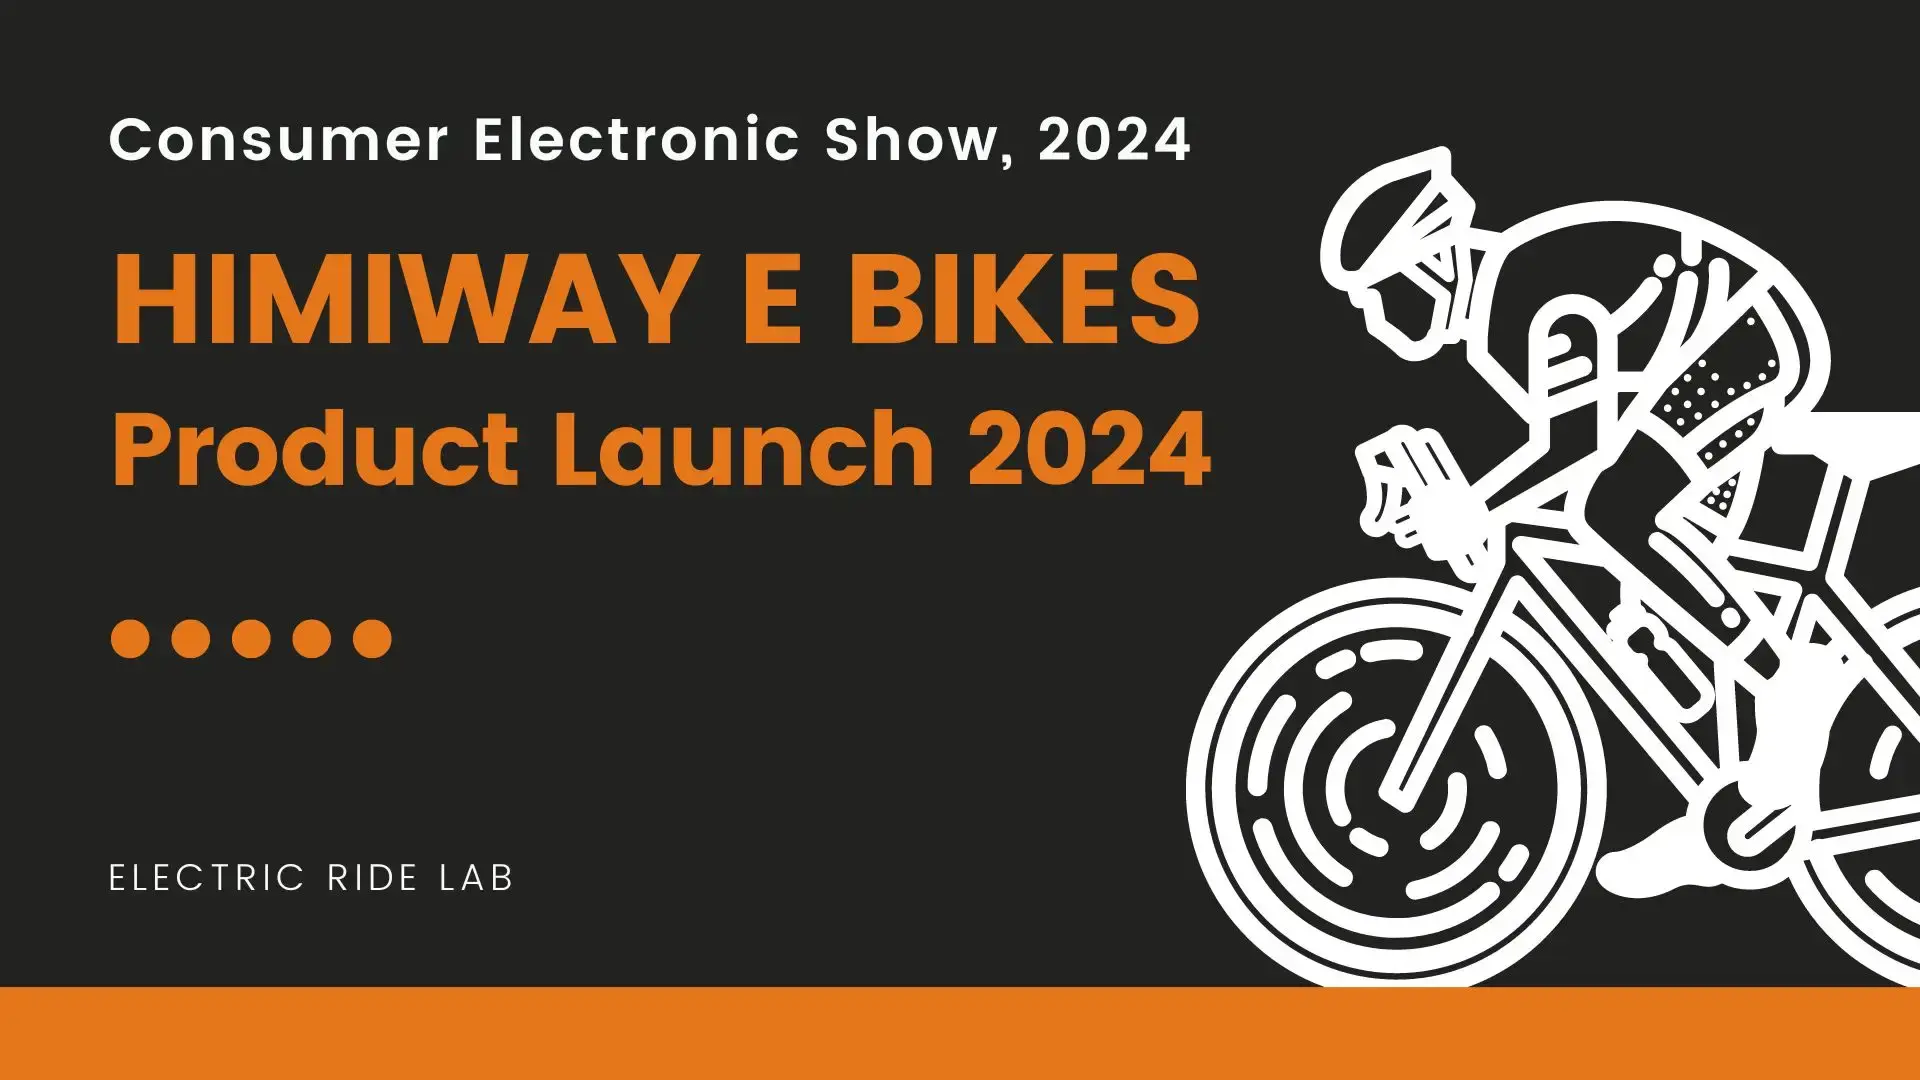 Top 8 New Himiway Electric Bikes Unveiled at CES 2024